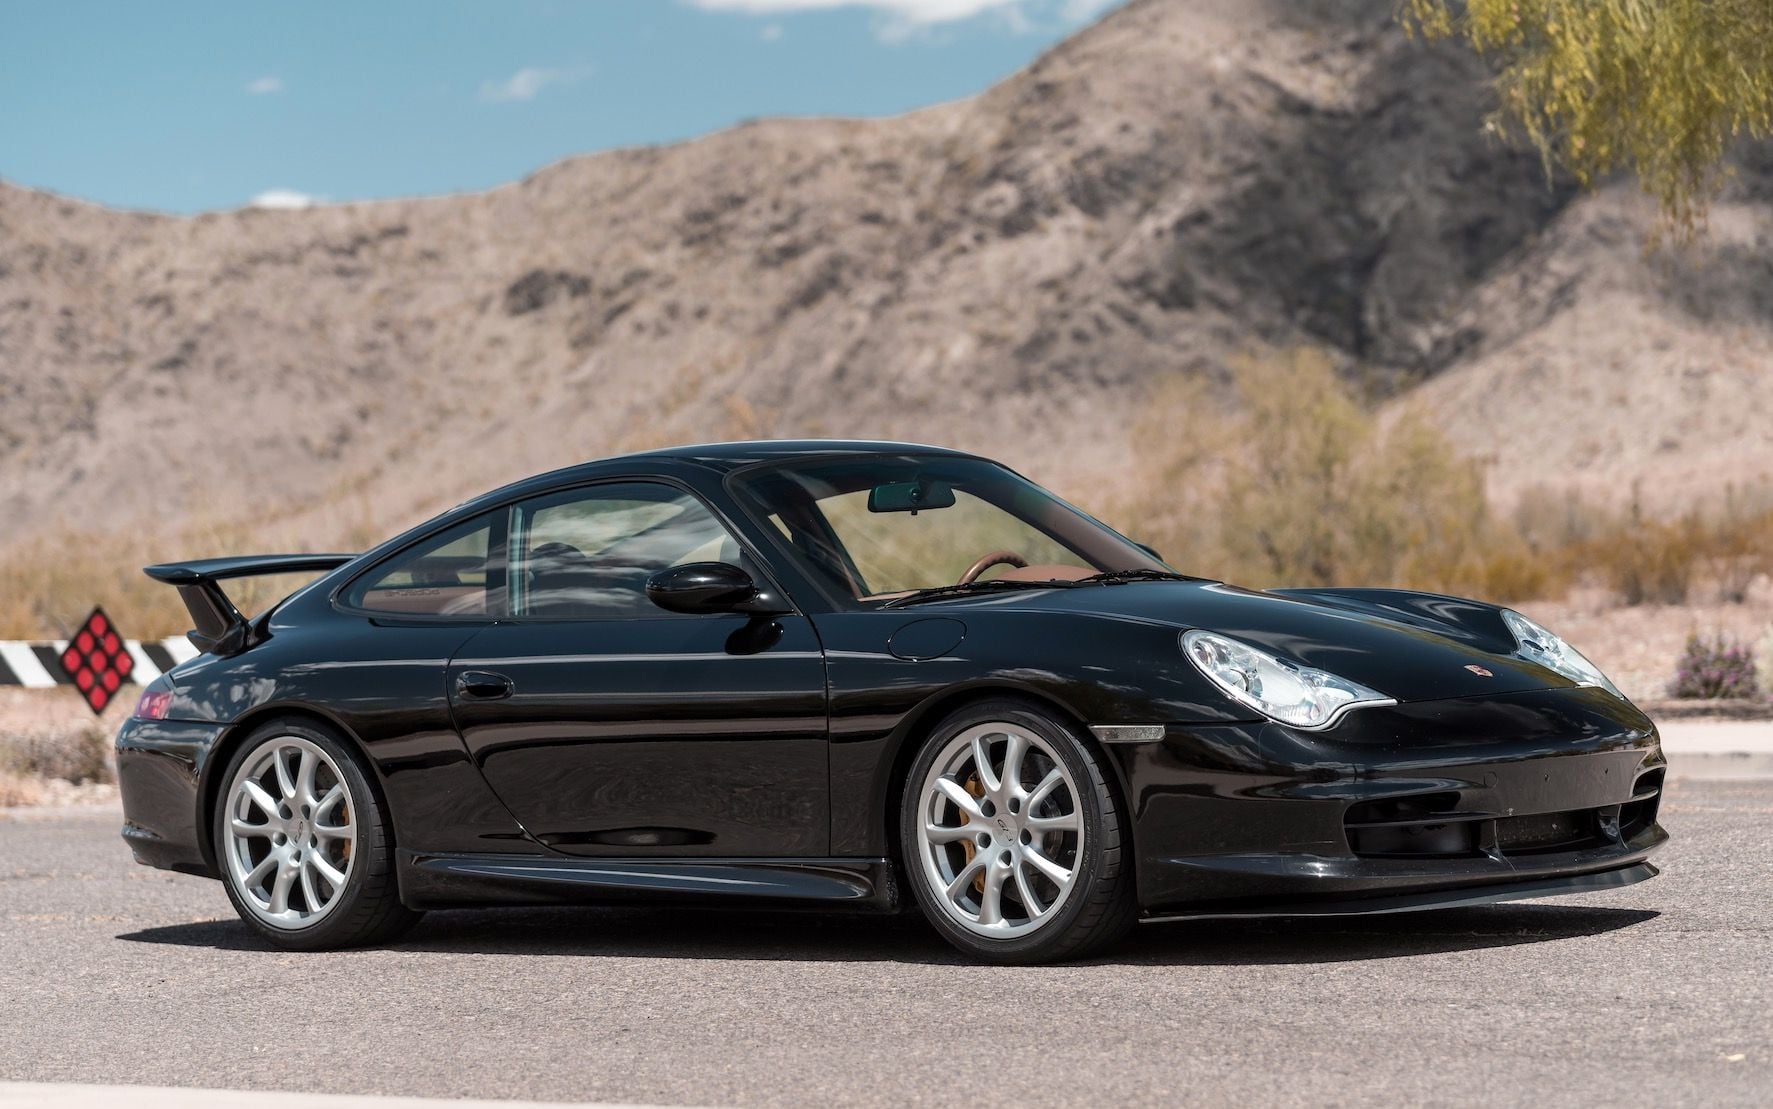 2004 Porsche GT3 - 2004 GT3 - Used - VIN WP0AC29994S692391 - 58,150 Miles - 6 cyl - 2WD - Manual - Coupe - Black - Gilbert, AZ 85296, United States